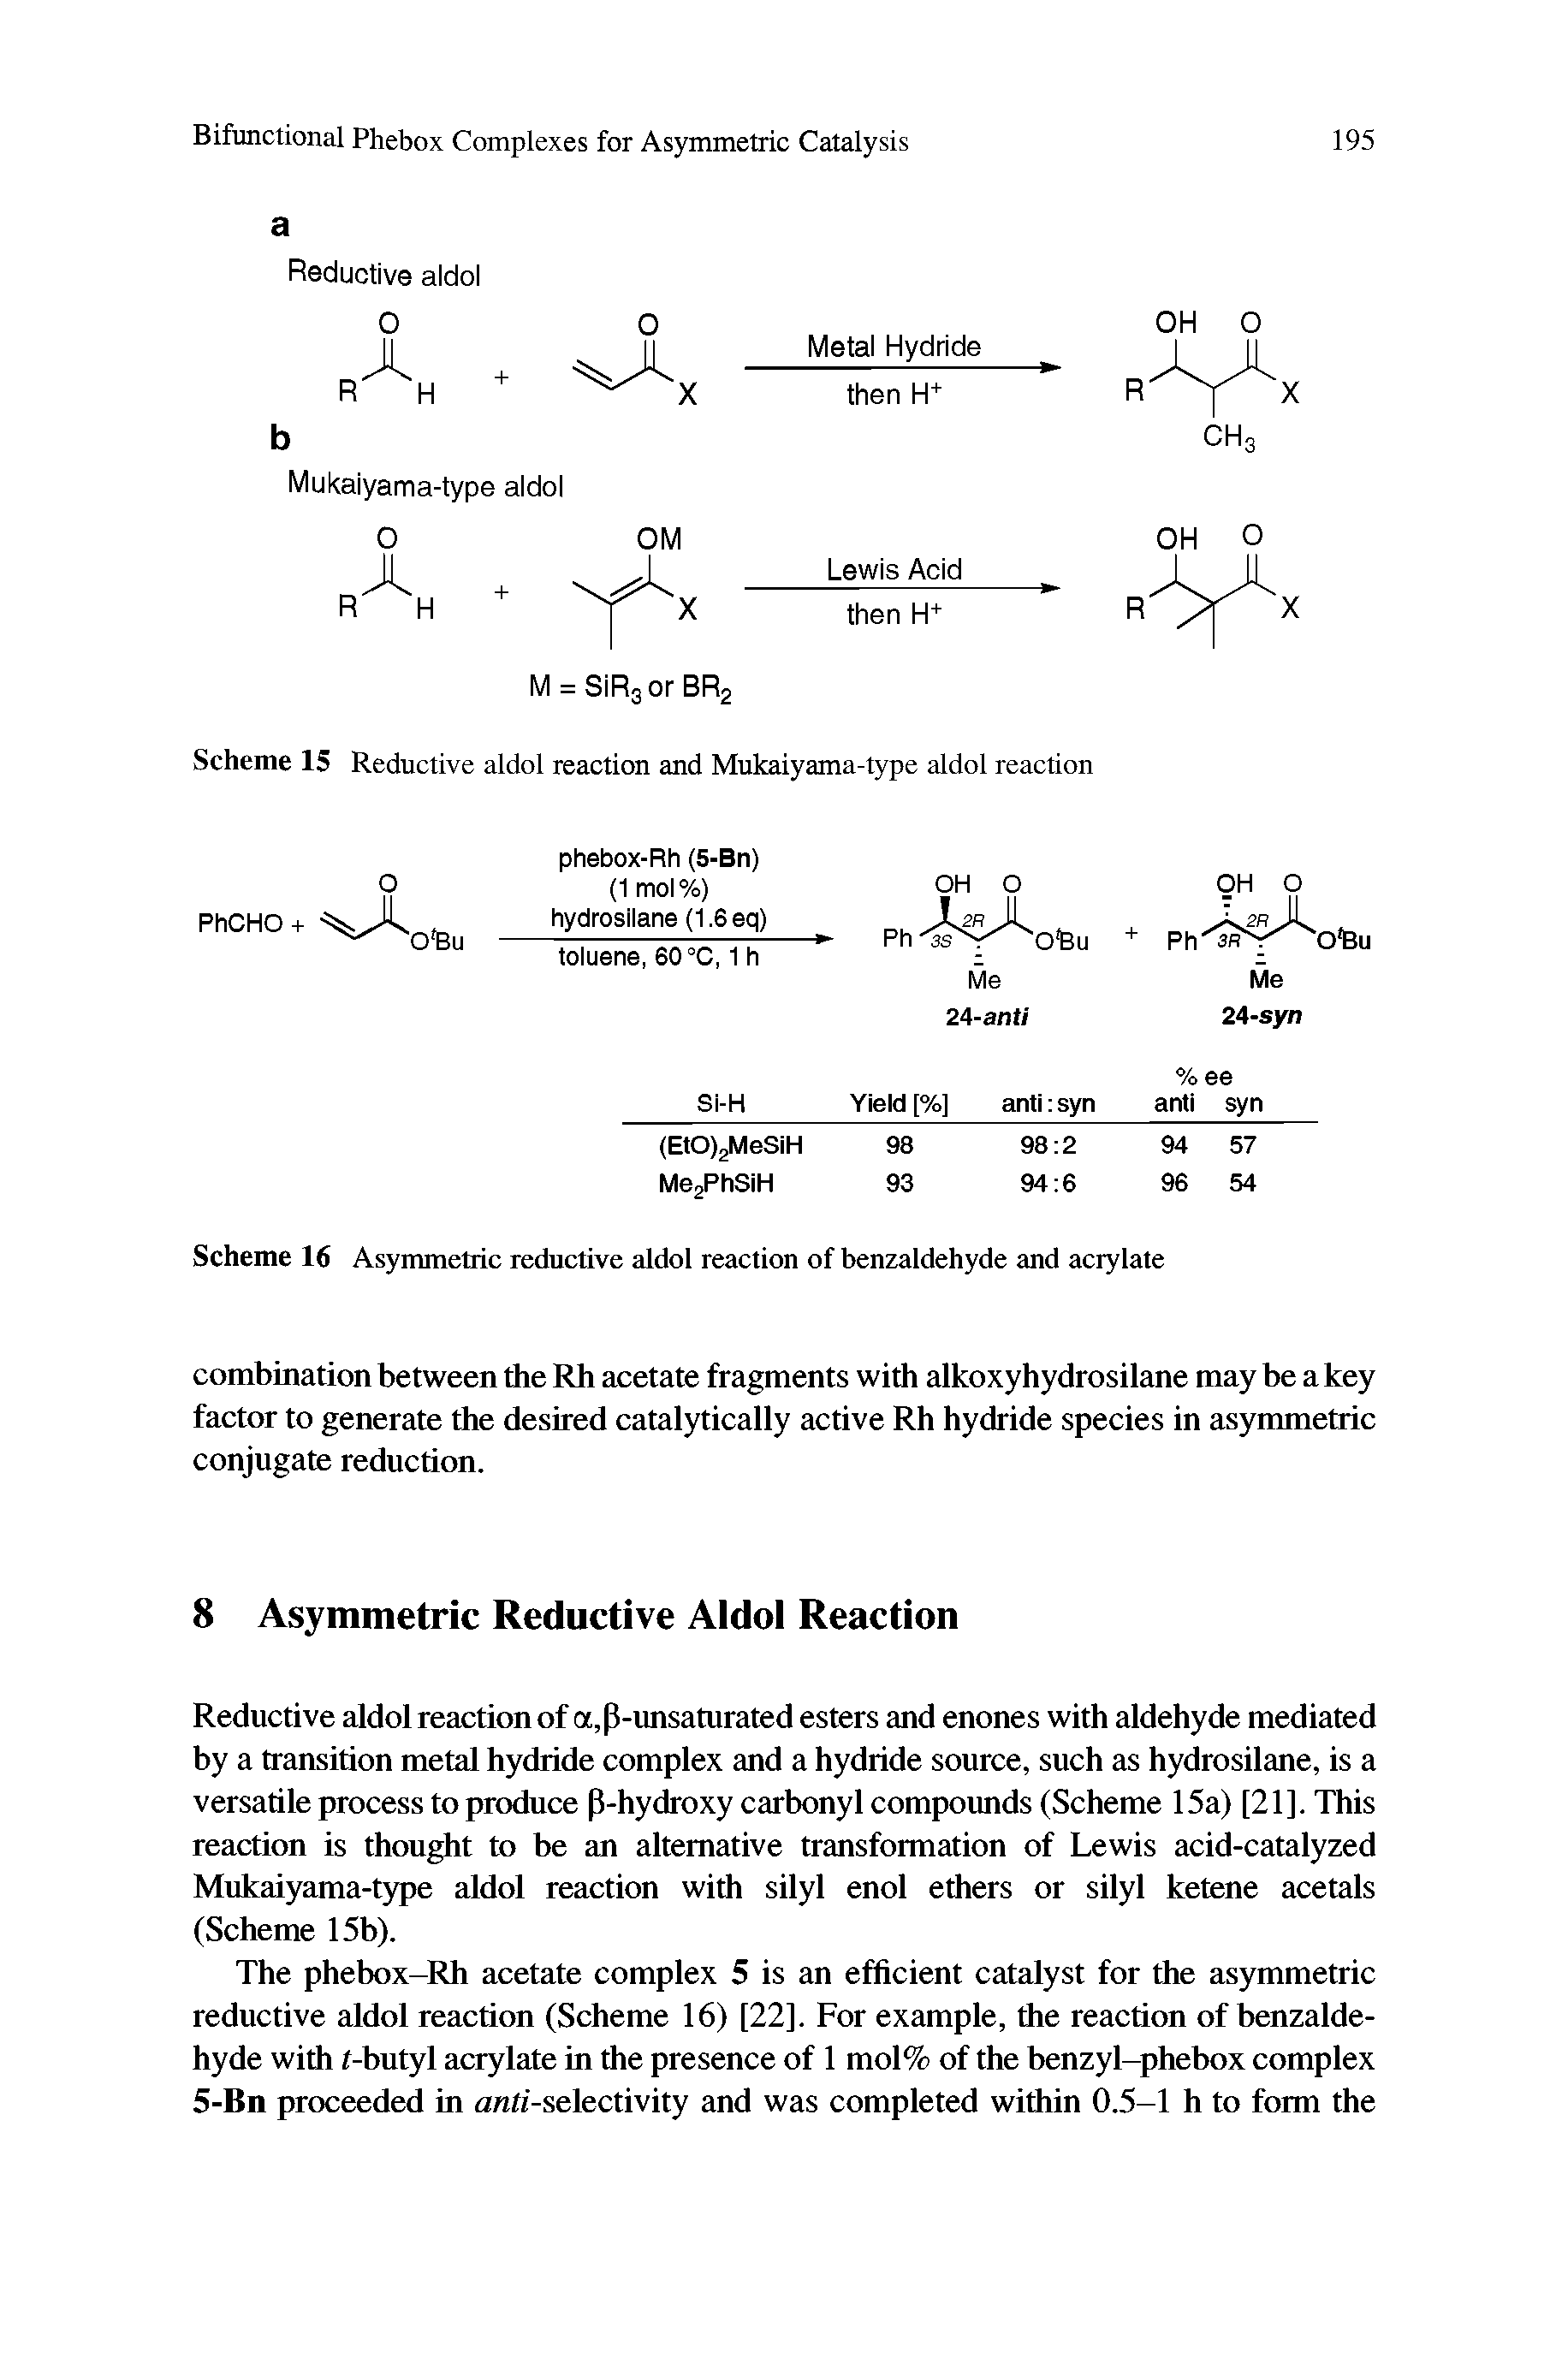 Scheme 16 Asymmetric reductive aldol reaction of benzaldehyde and acrylate...